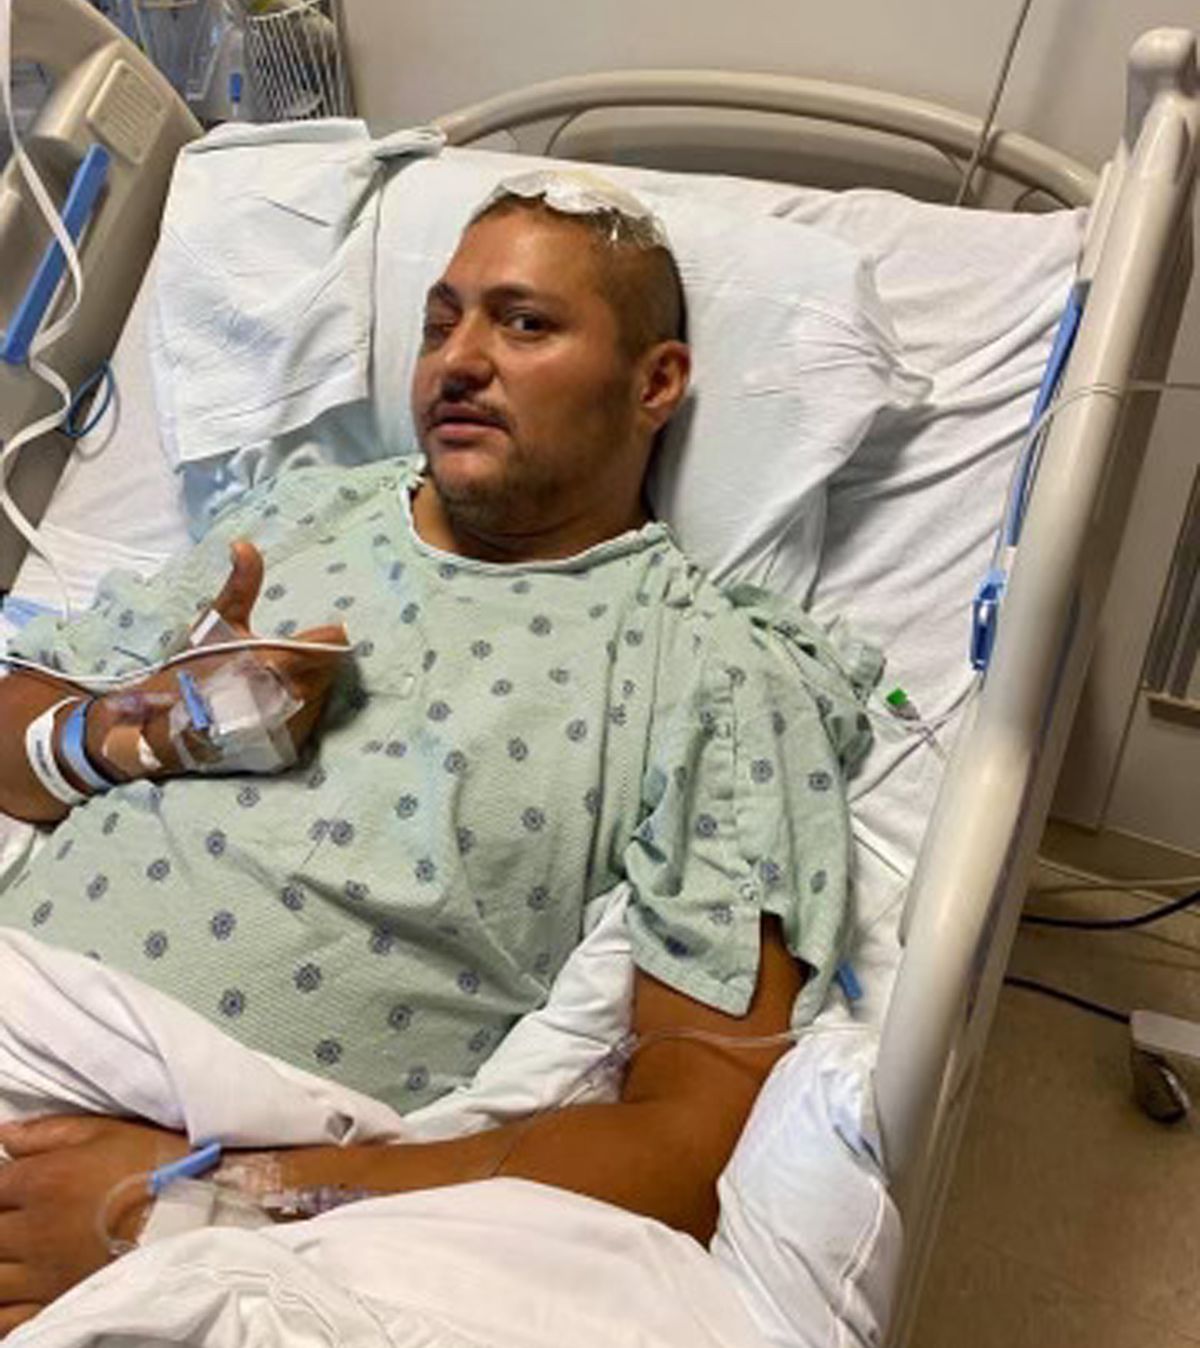 Chicago police officer Carlos Yanez Jr. is recovering from wounds he suffered when someone in a car he had pulled over opened fire on him and his partner, who was killed.